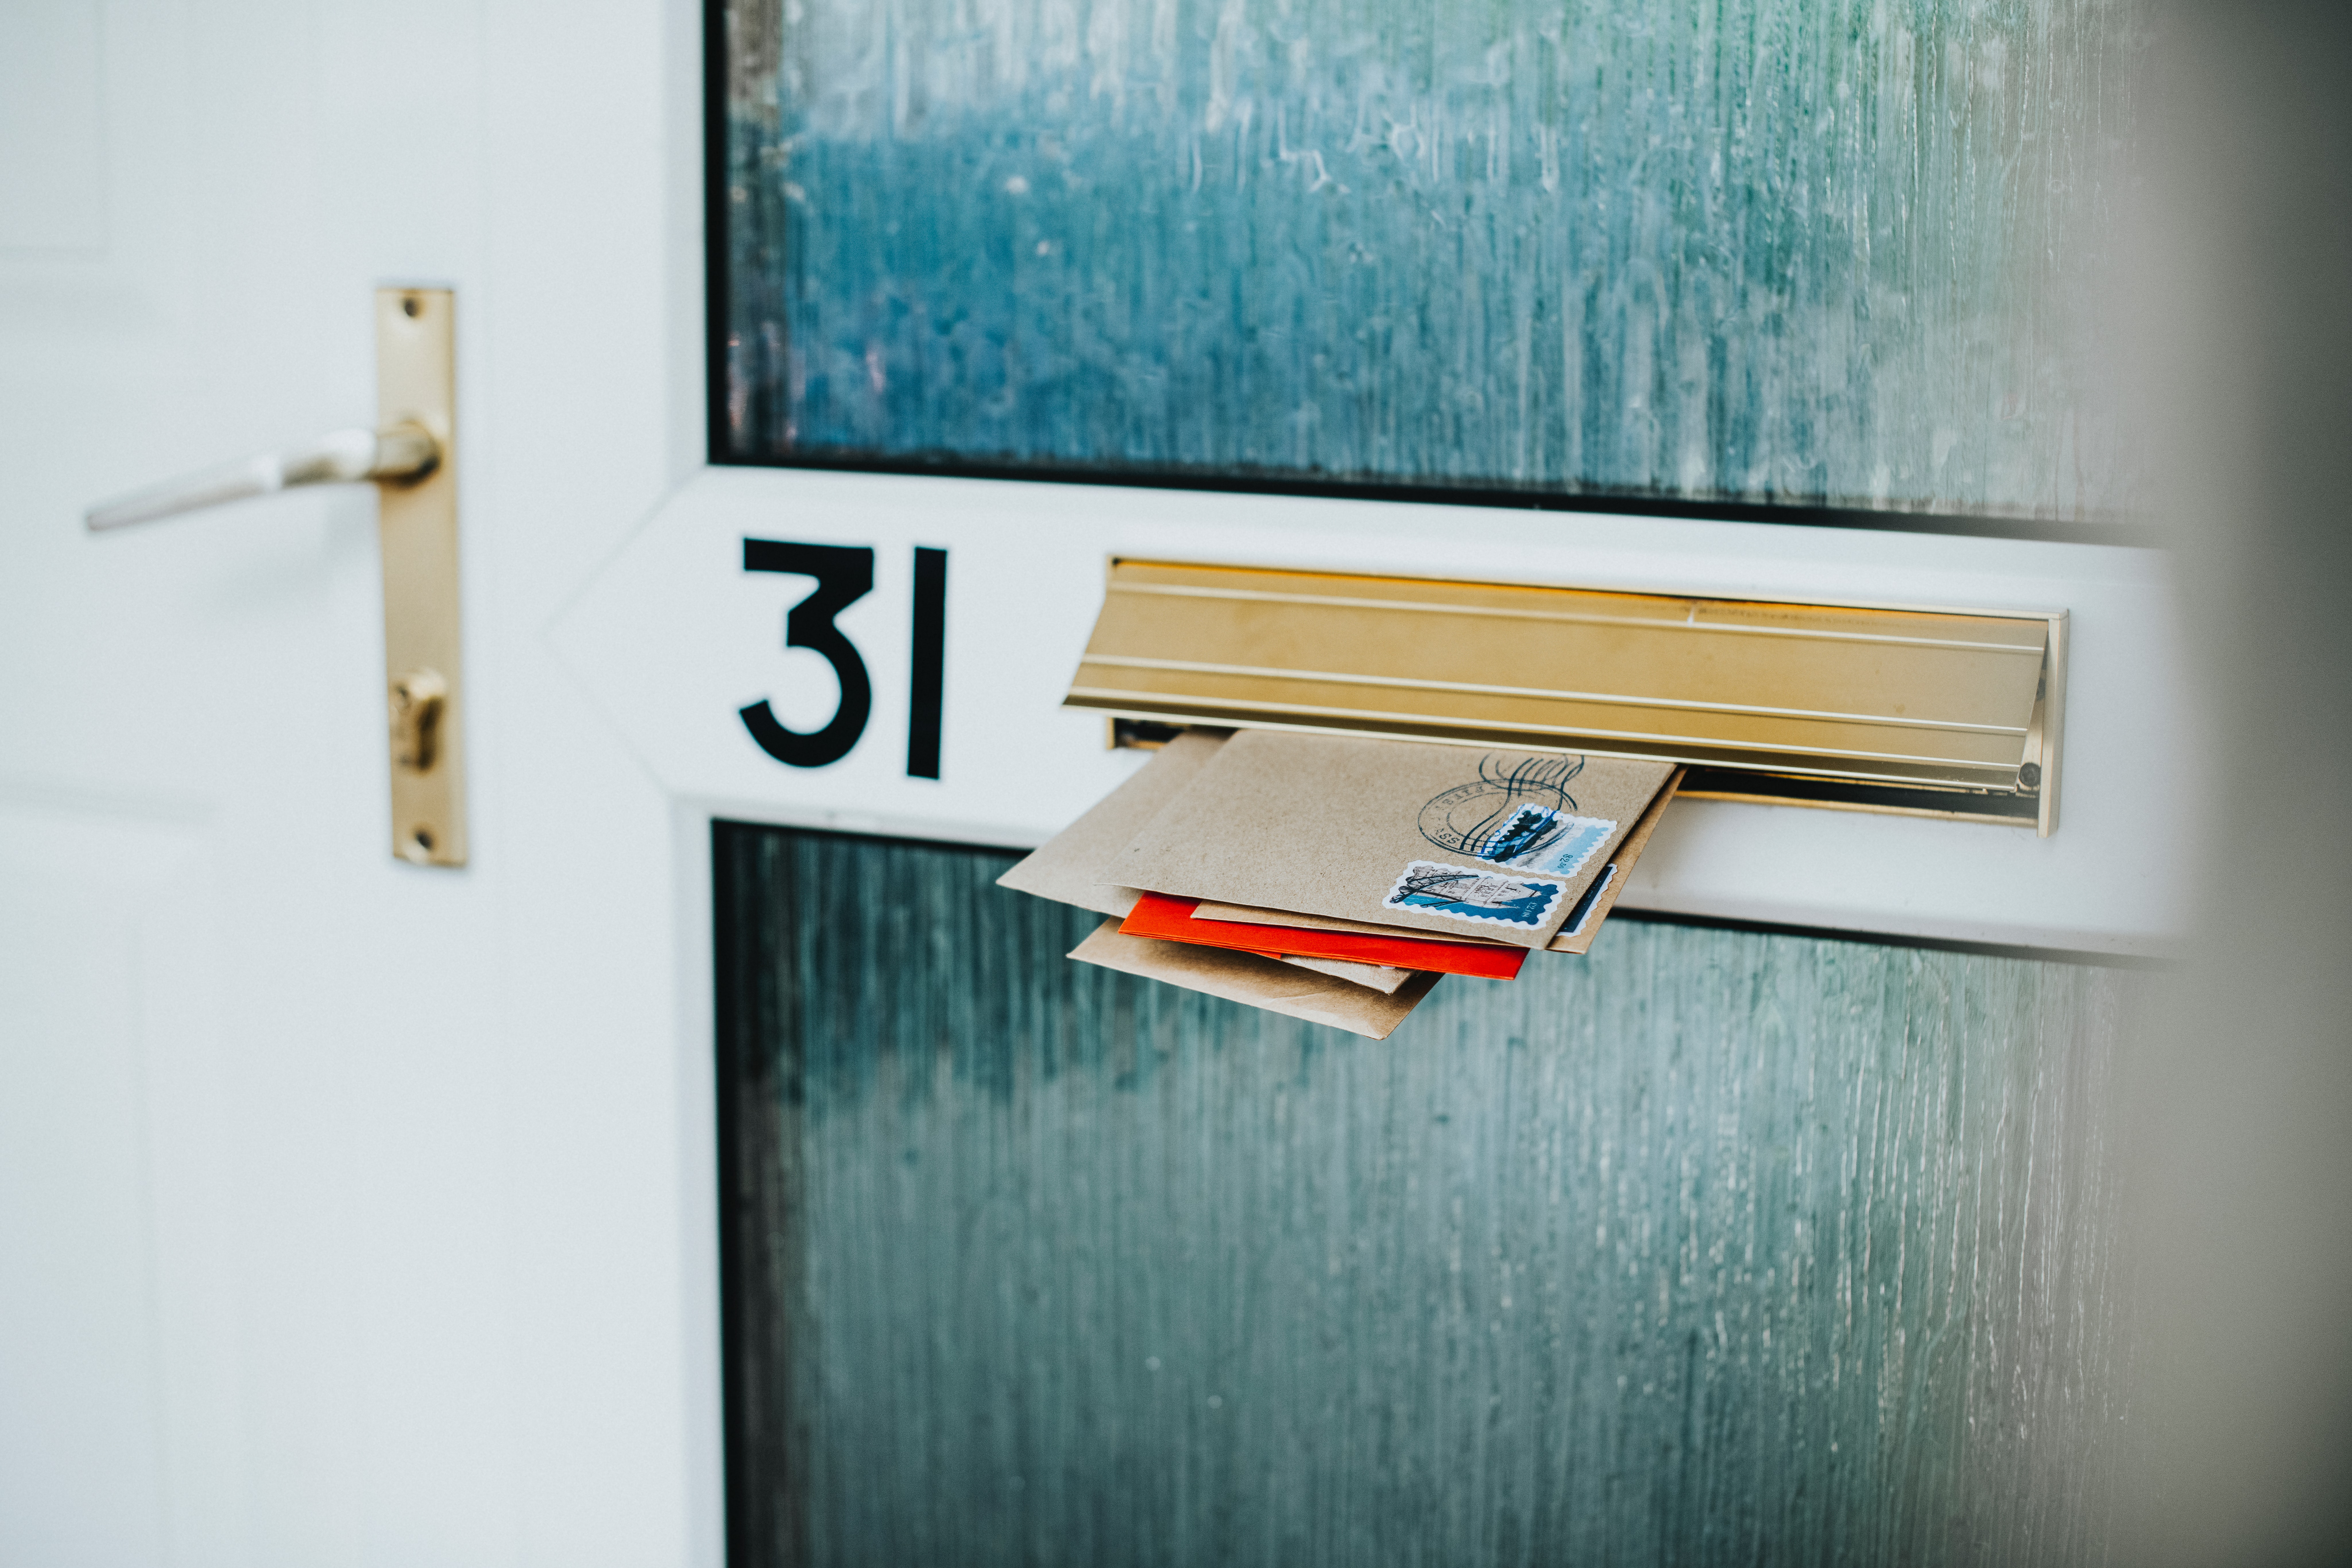 where should you change your address when you move?